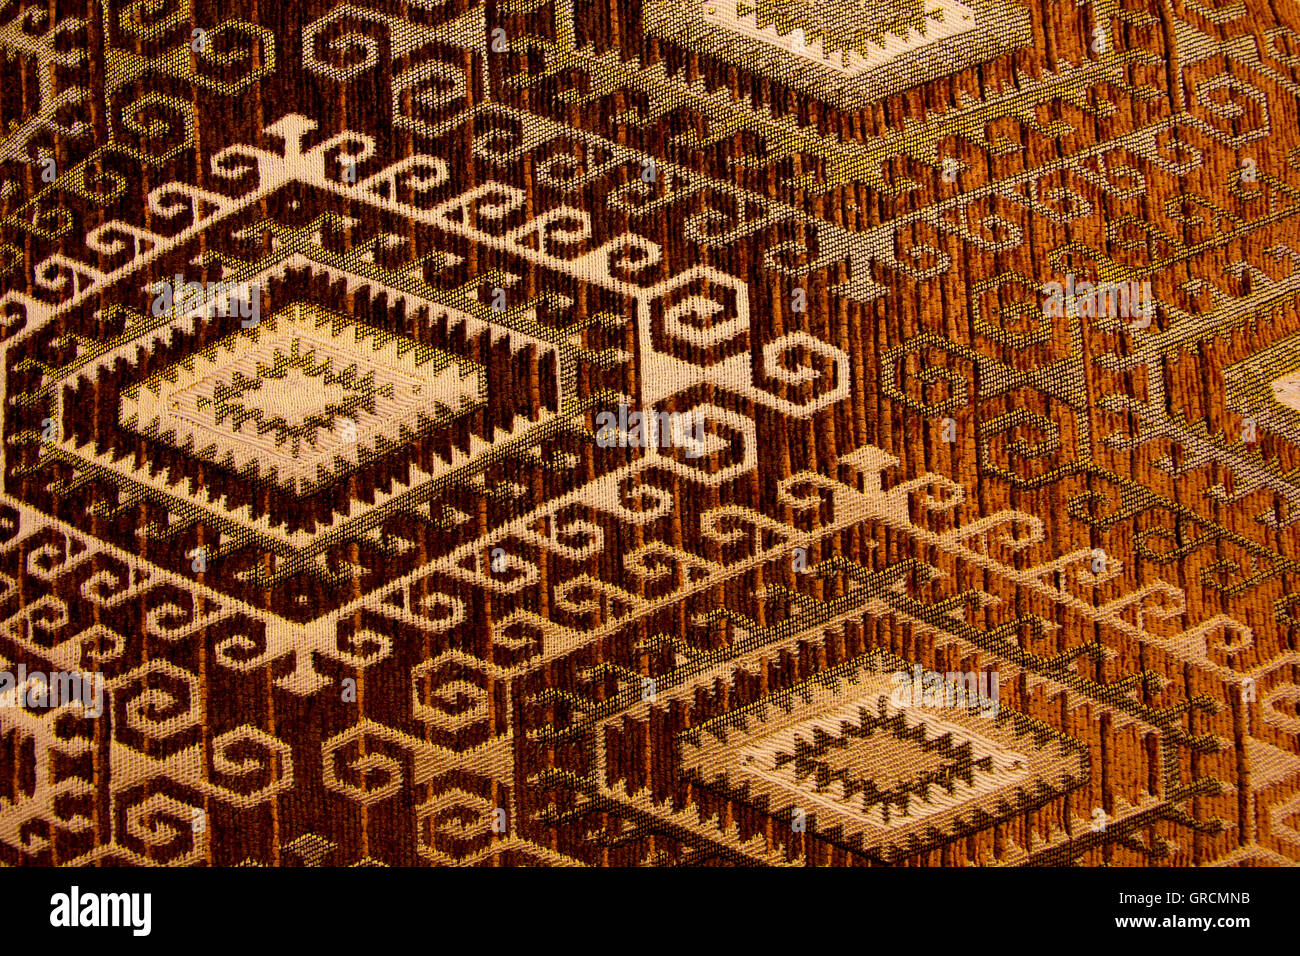 Fabric with geometric forms seen from above Stock Photo